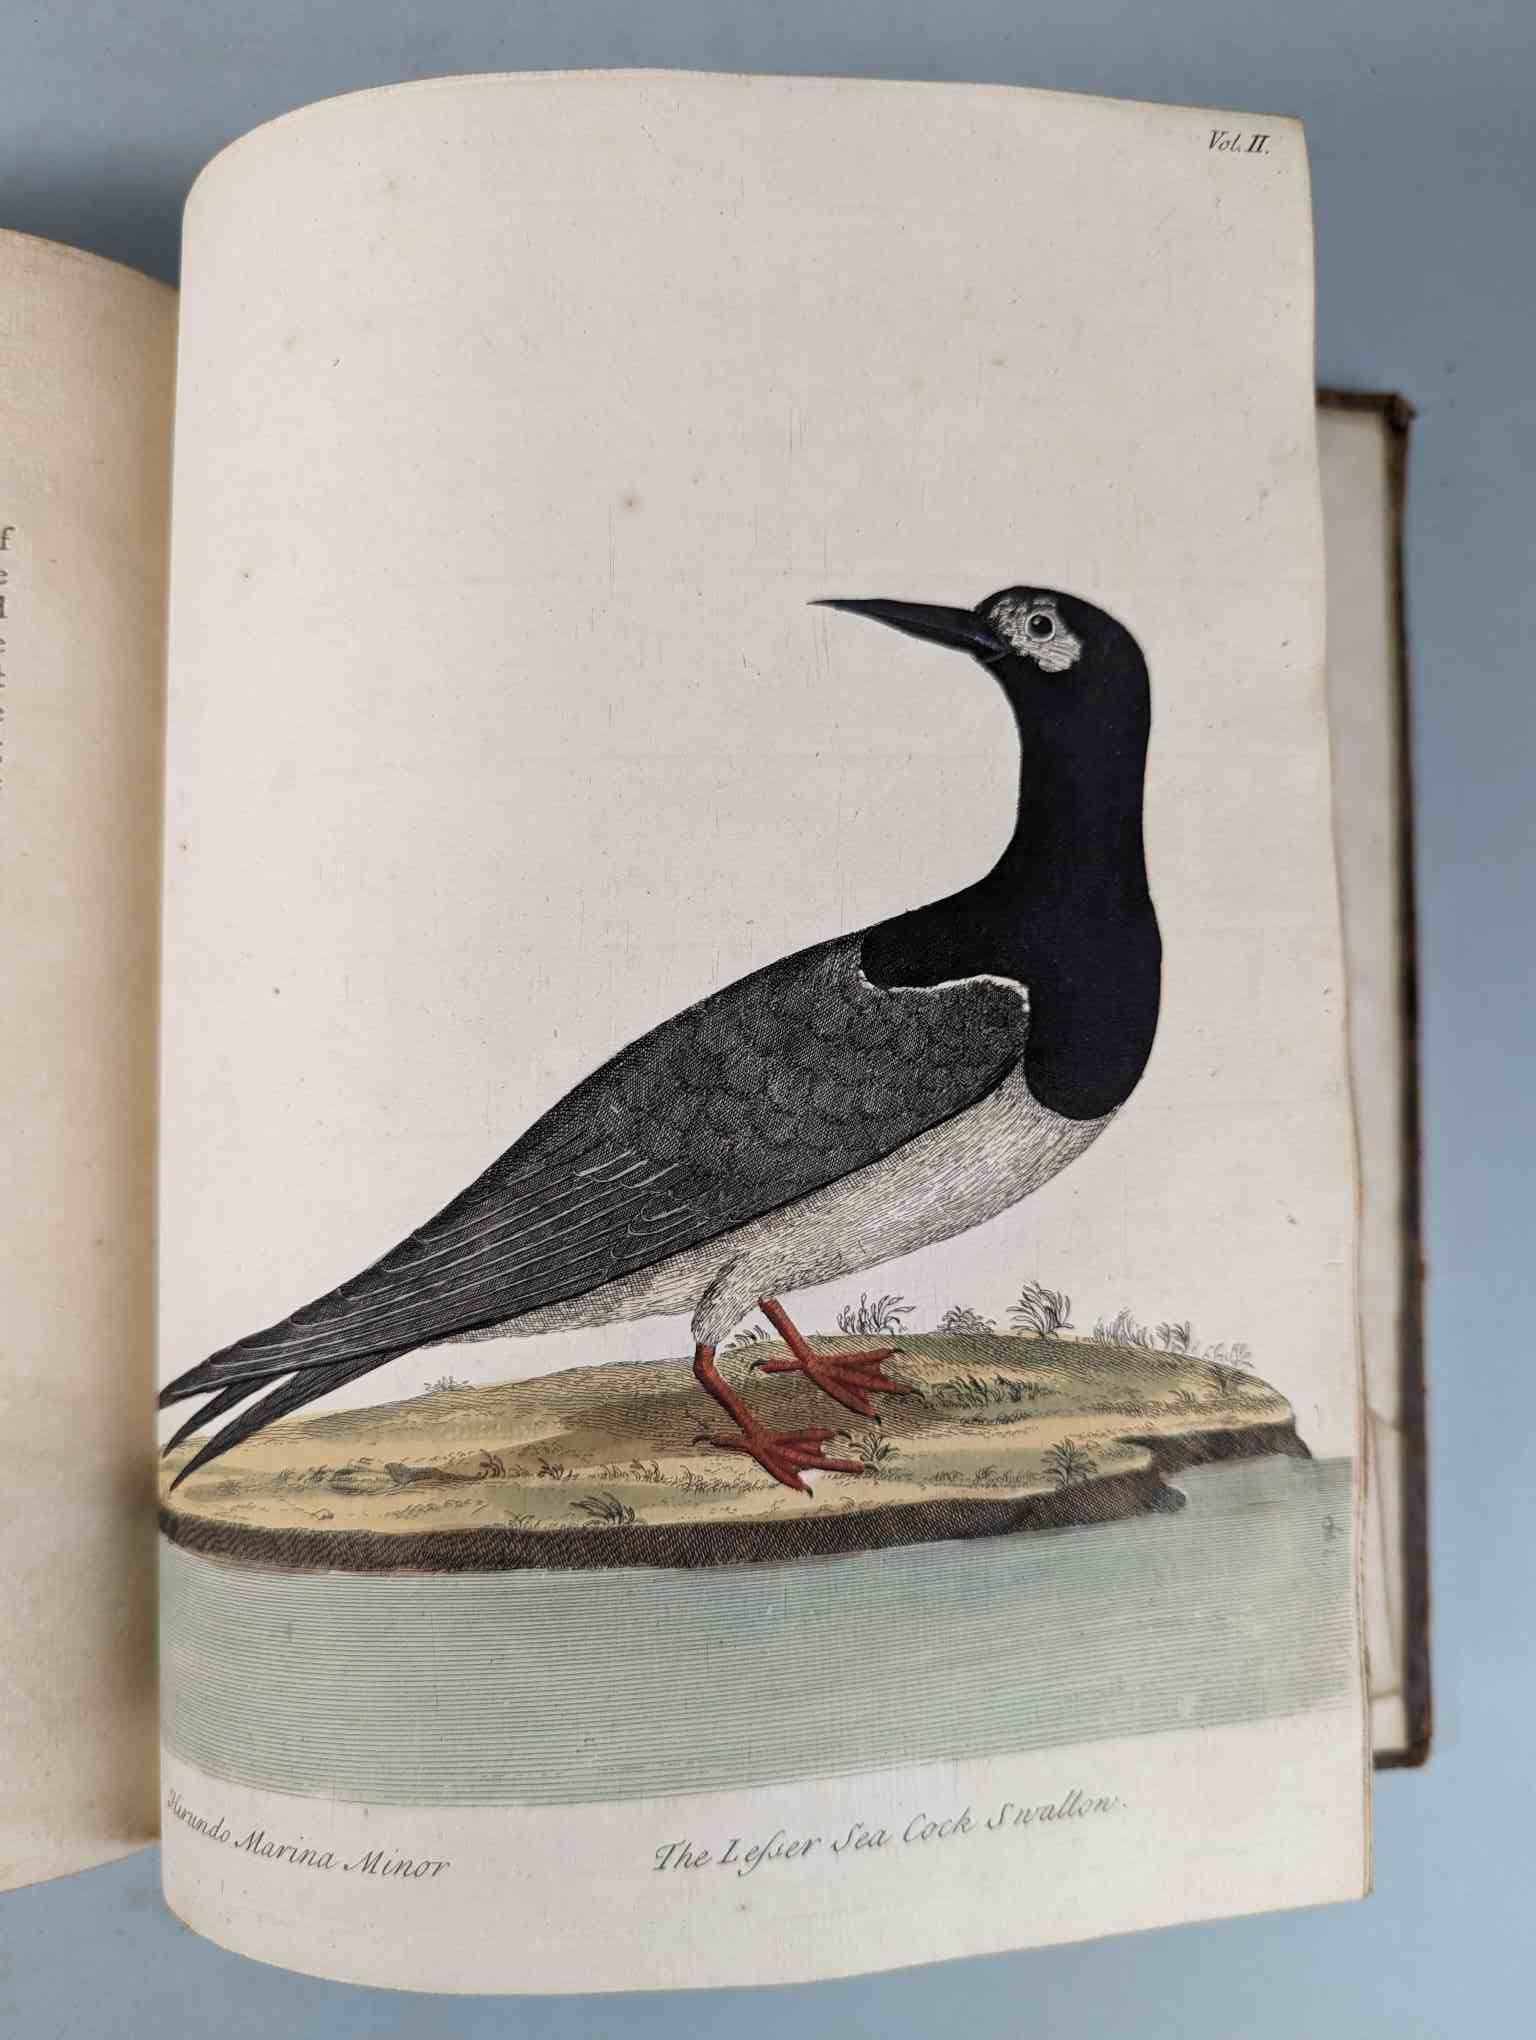 ALBIN, Eleazar. A Natural History of Birds, to which are added, Notes and Observations by W. - Image 193 of 208